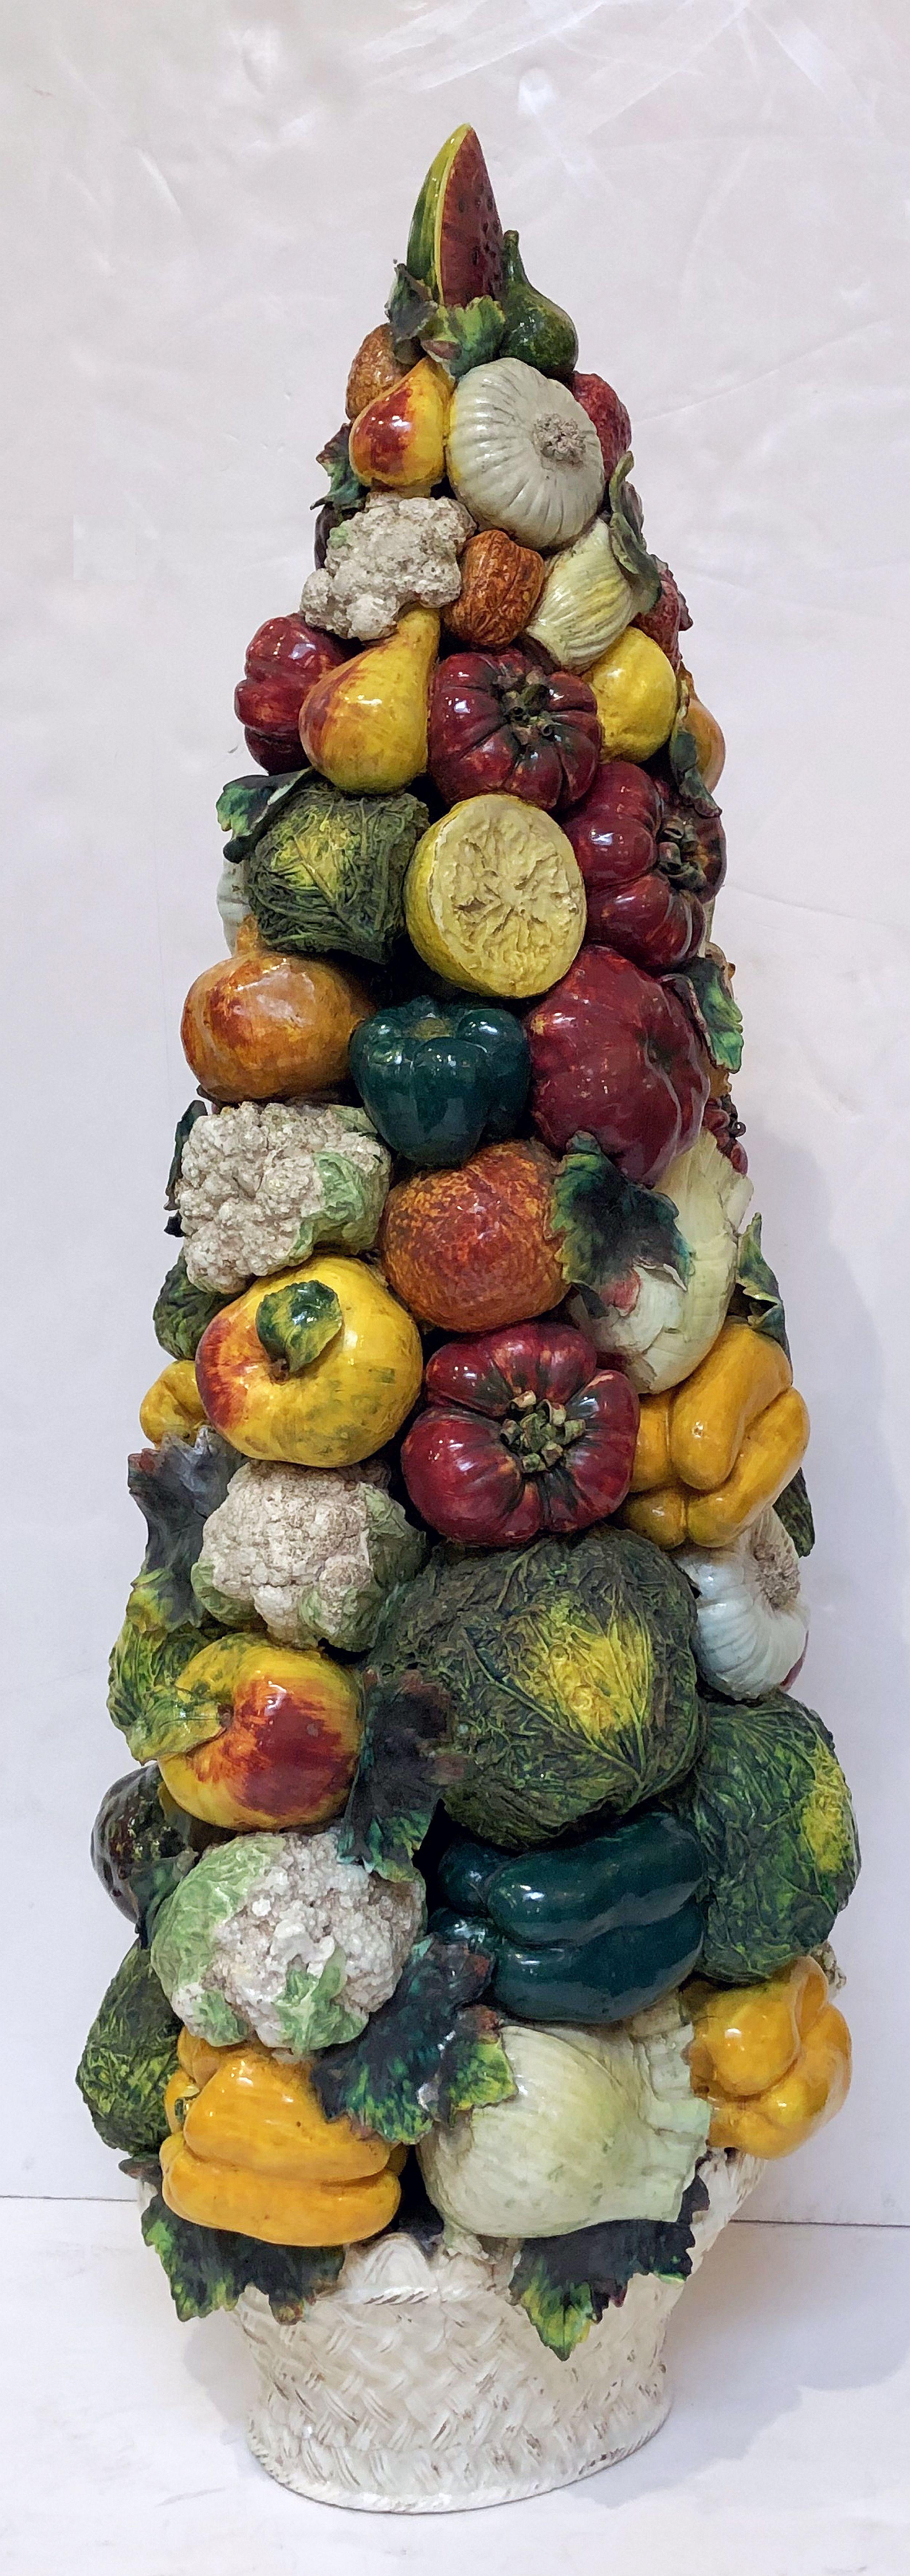 A fine Majolica vegetable tower or topiary, attributable to the ceramic artisans of Este, Italy, featuring a naturalistic relief of vegetables upon a woven basket base.

Measurements: H 37 3/4 inches x W 14 1/2 inches x D 11 inches.